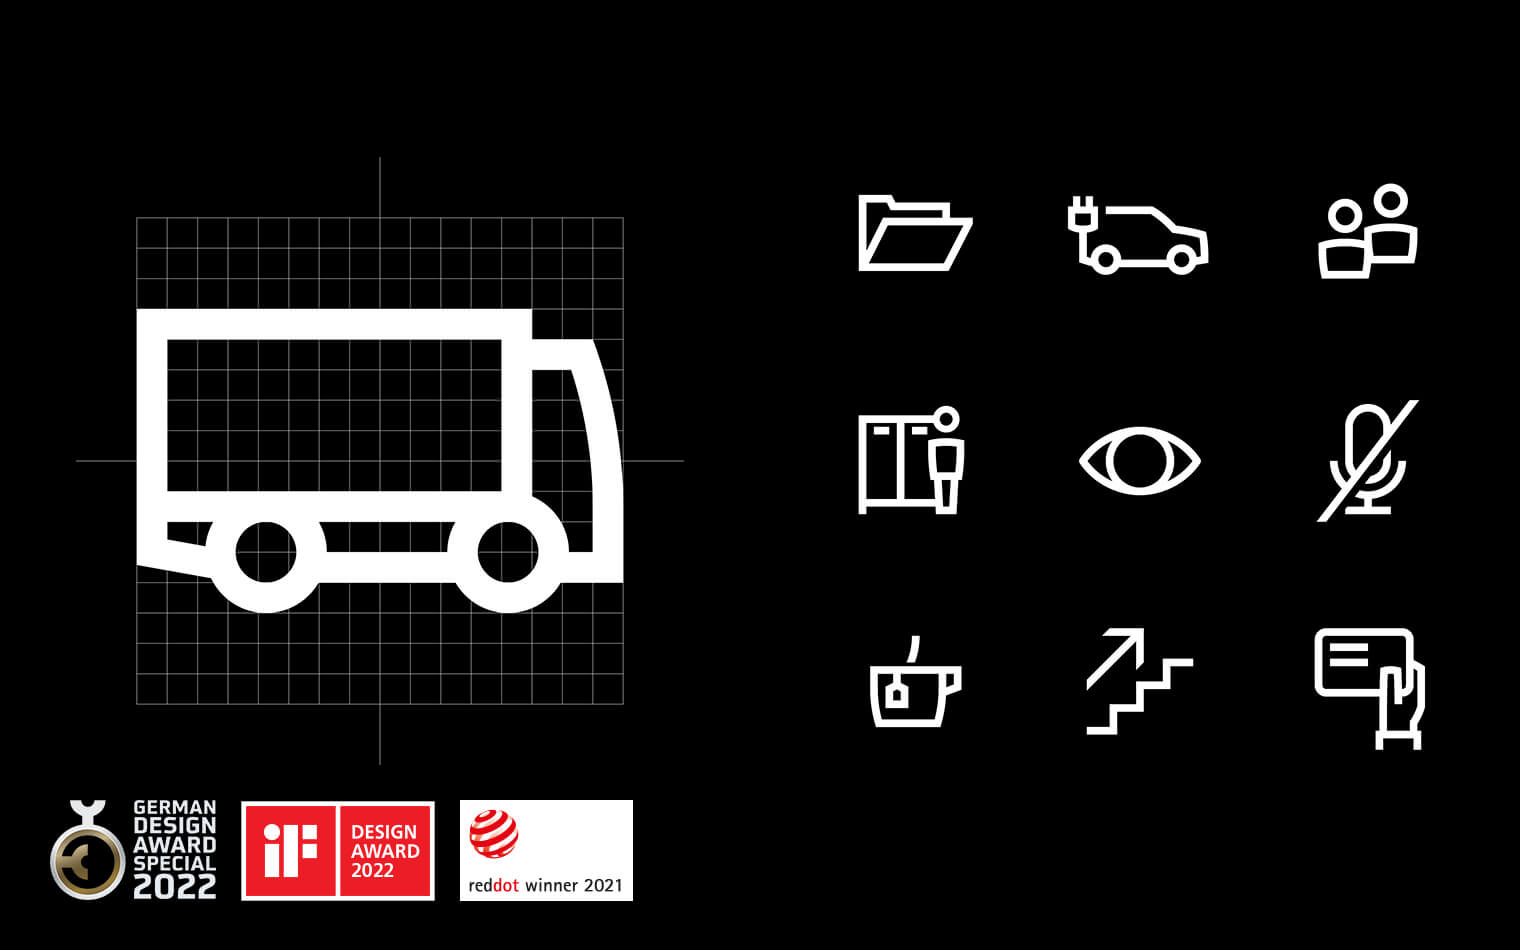 This image features icons of Wilo pictograms and the logos German Design Award 2022, Red Dot Winner 2021 and iF Design Award 2022.